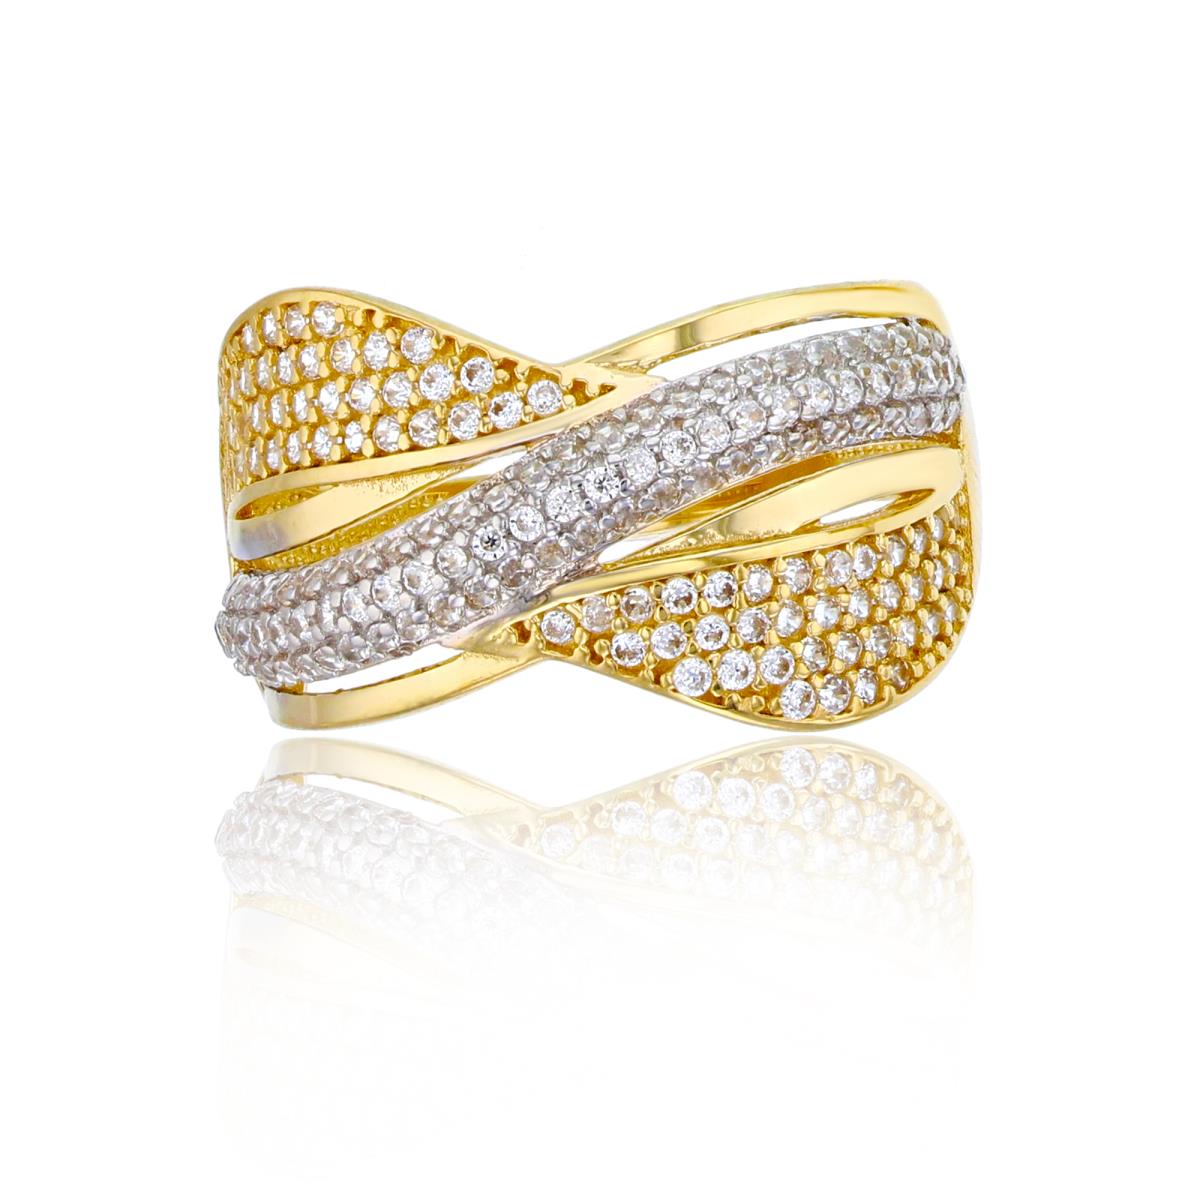 14K Two-Tone Gold Micropave Overlapping Fashion Ring